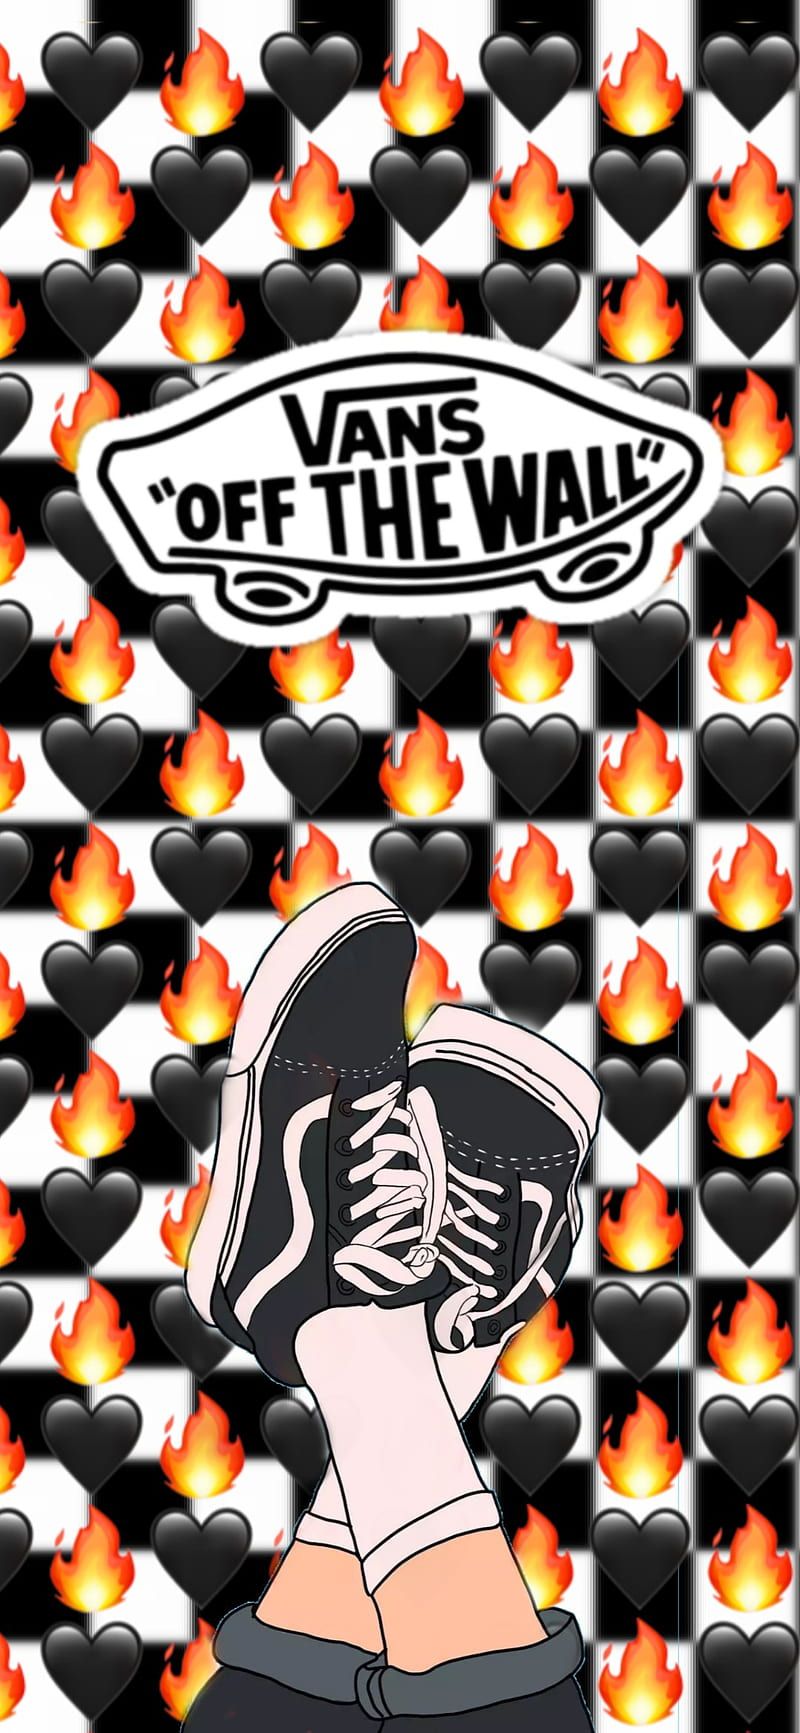 Vans off the wall - Vans, checkered